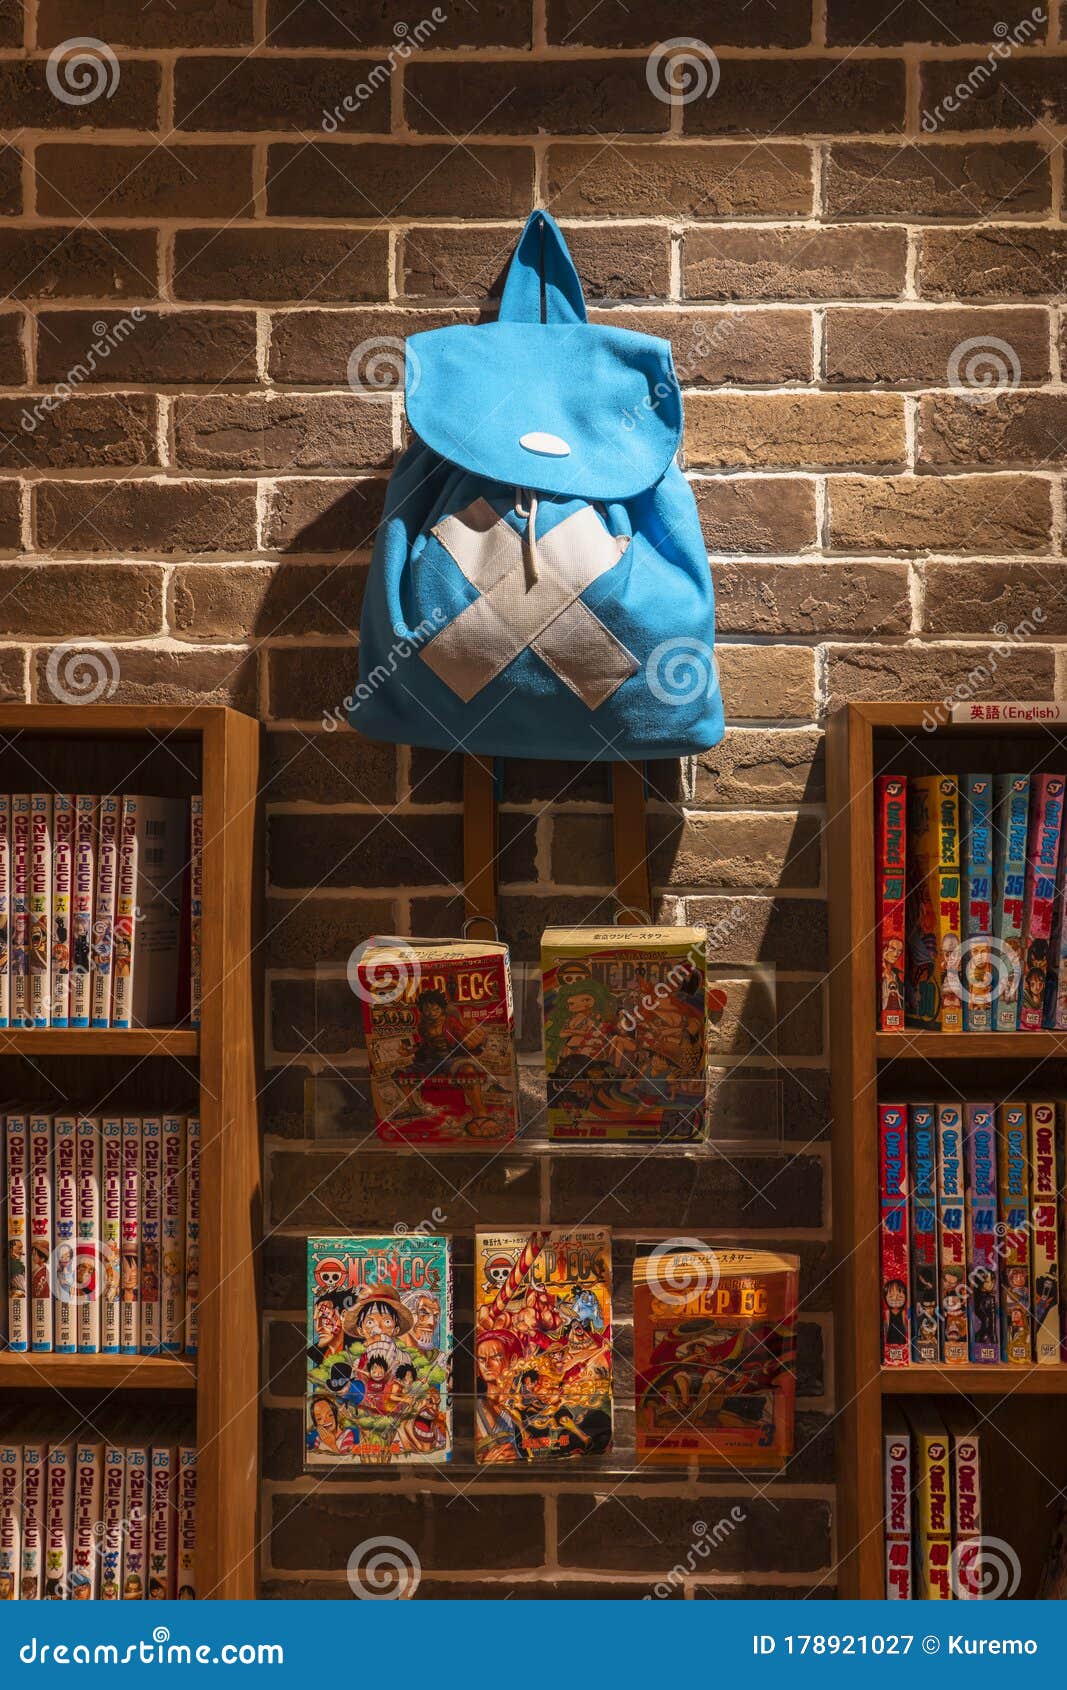 Chopper S Backpack On Display In The Tokyo Tower S Cafe Mugiwara Editorial Photography Image Of Piece Books